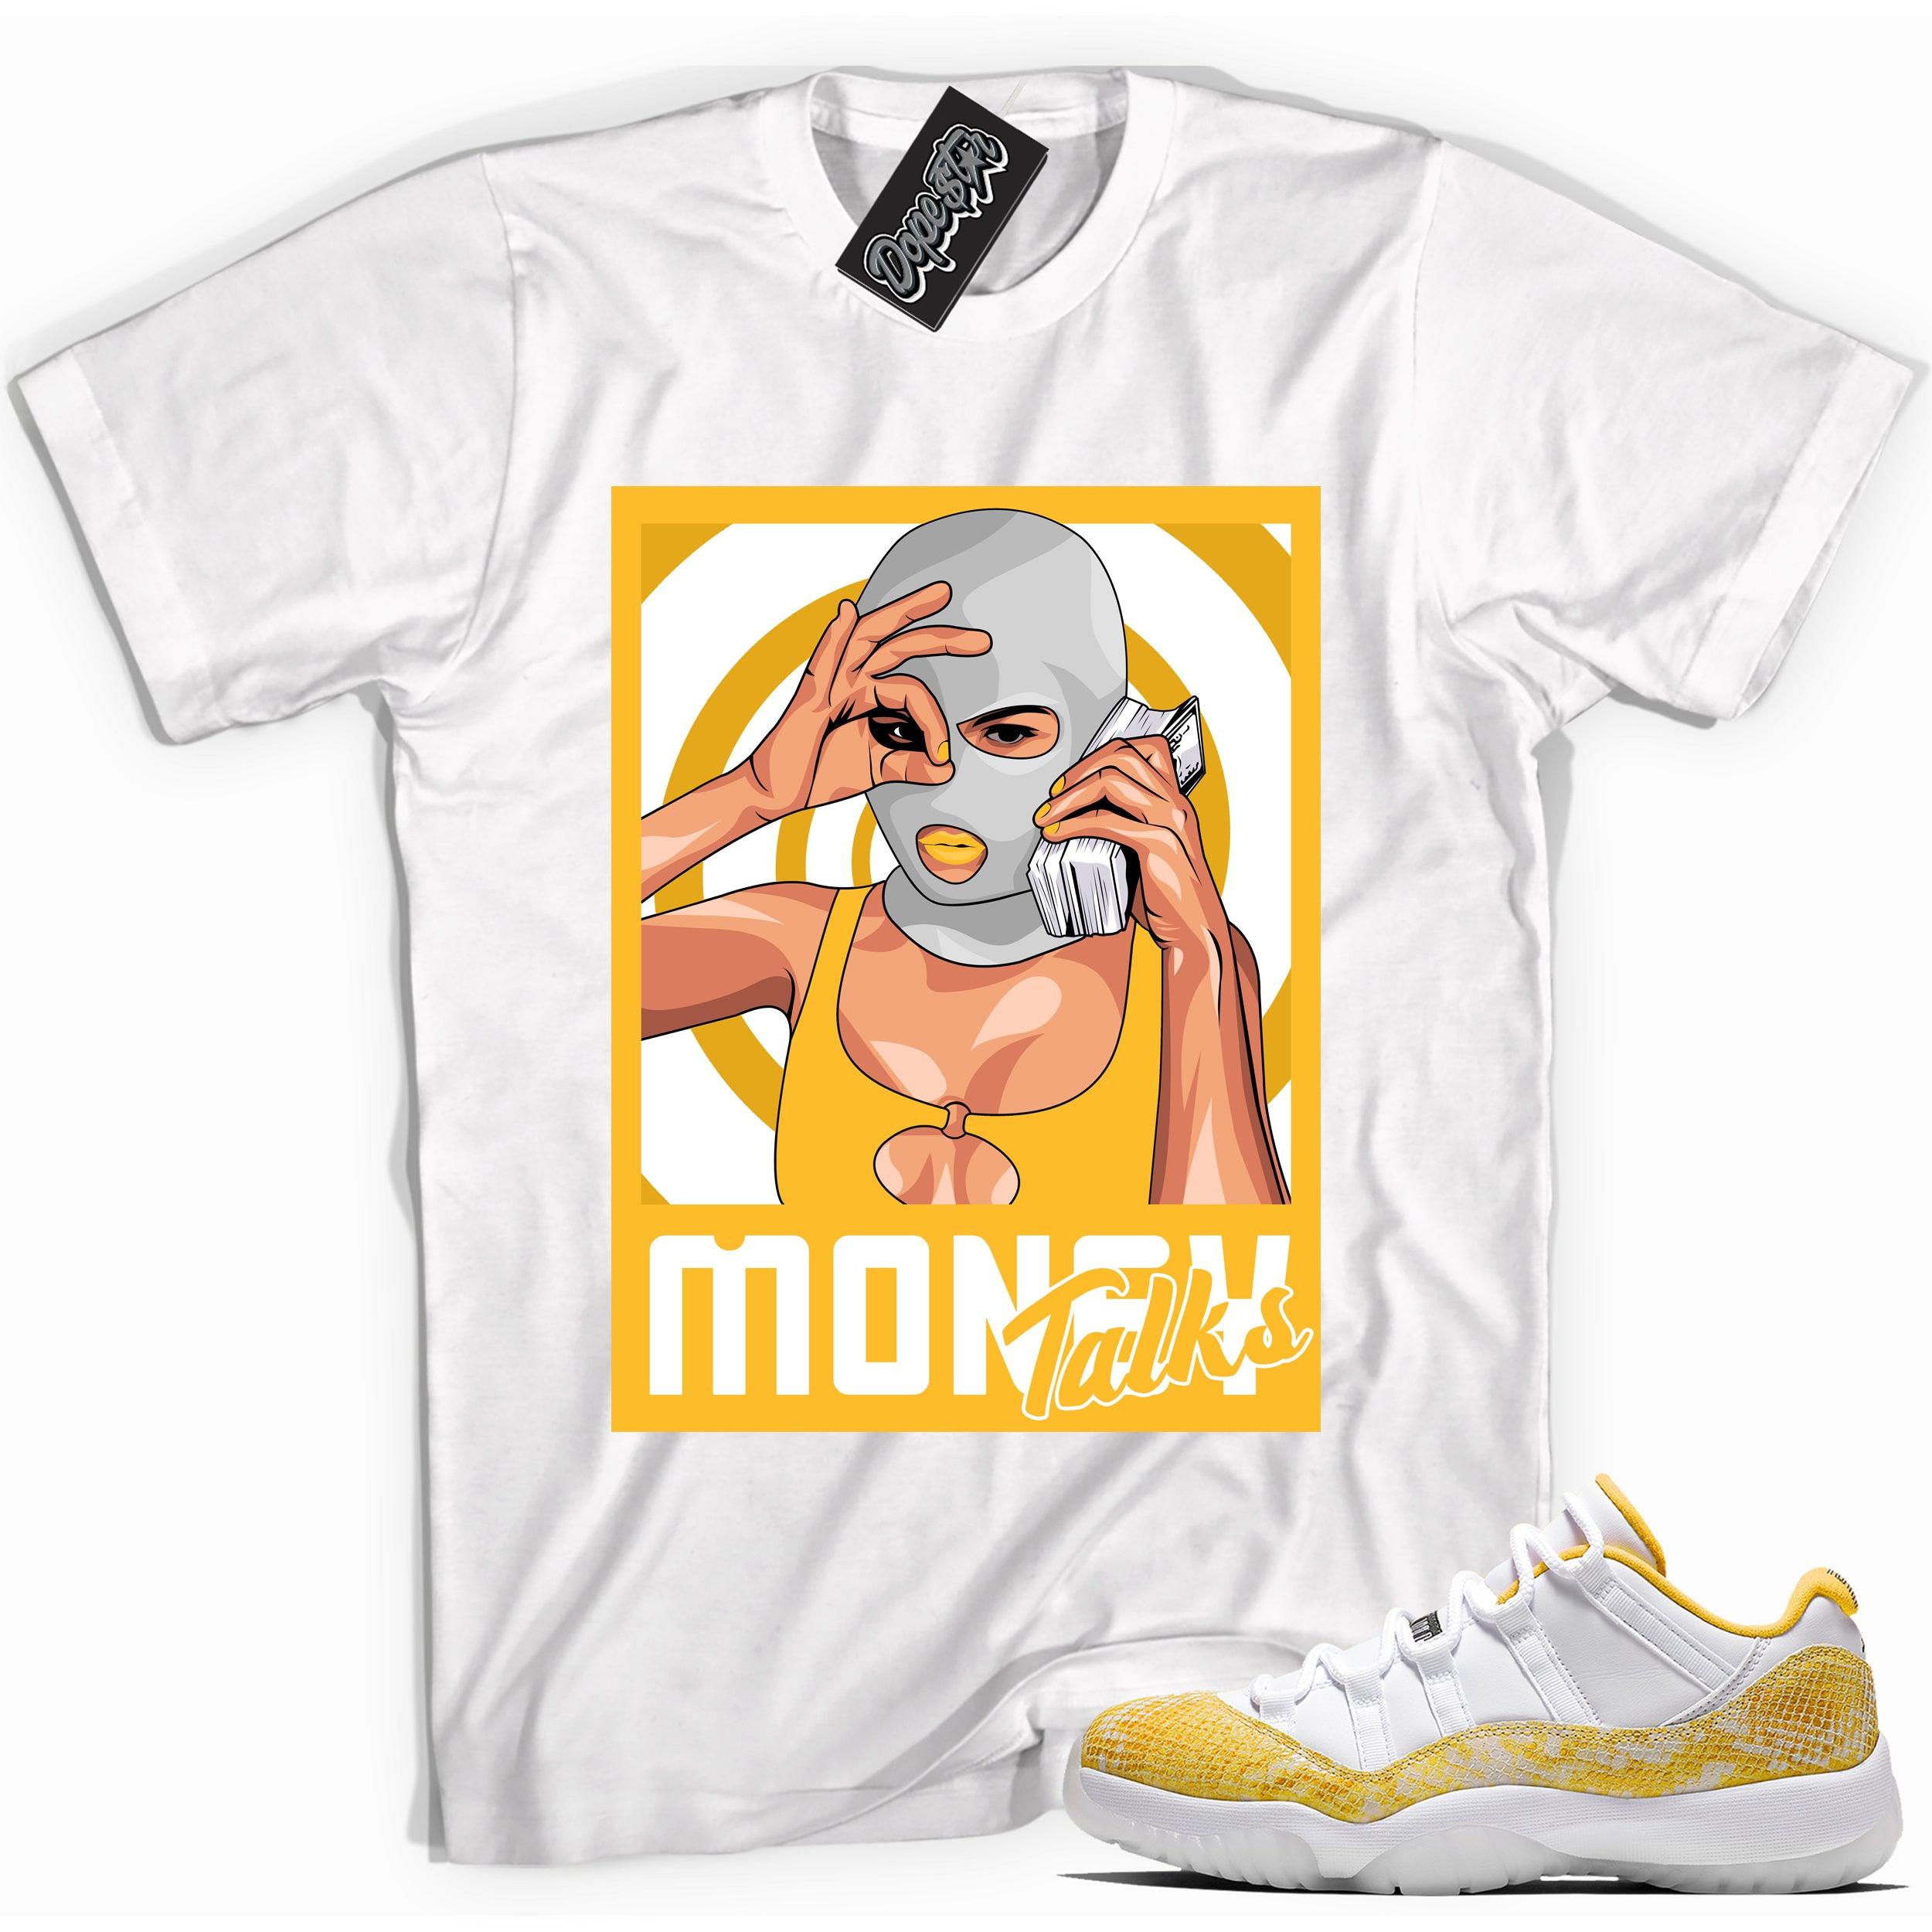 Cool white graphic tee with 'money talks' print, that perfectly matches Air Jordan 11 Low Yellow Snakeskin sneakers